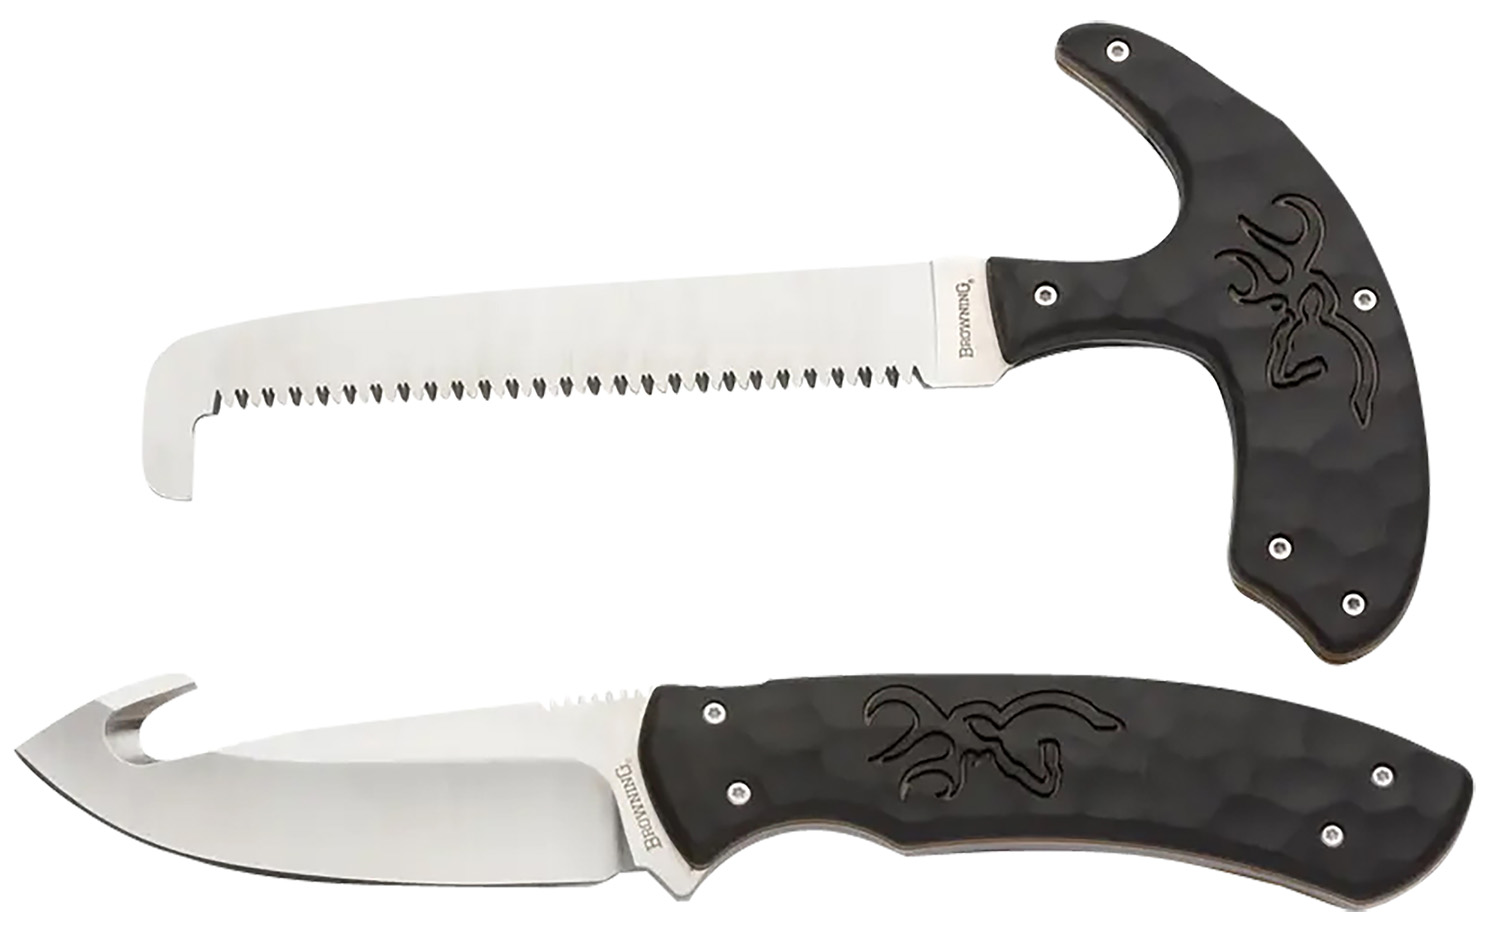 Browning 3220420 Primal Combo 3.75"/5.25" Fixed Drop Point Gut Hook/Skinner, Saw 8Cr13MoV SS Blade, Black Polymer W/Rubb